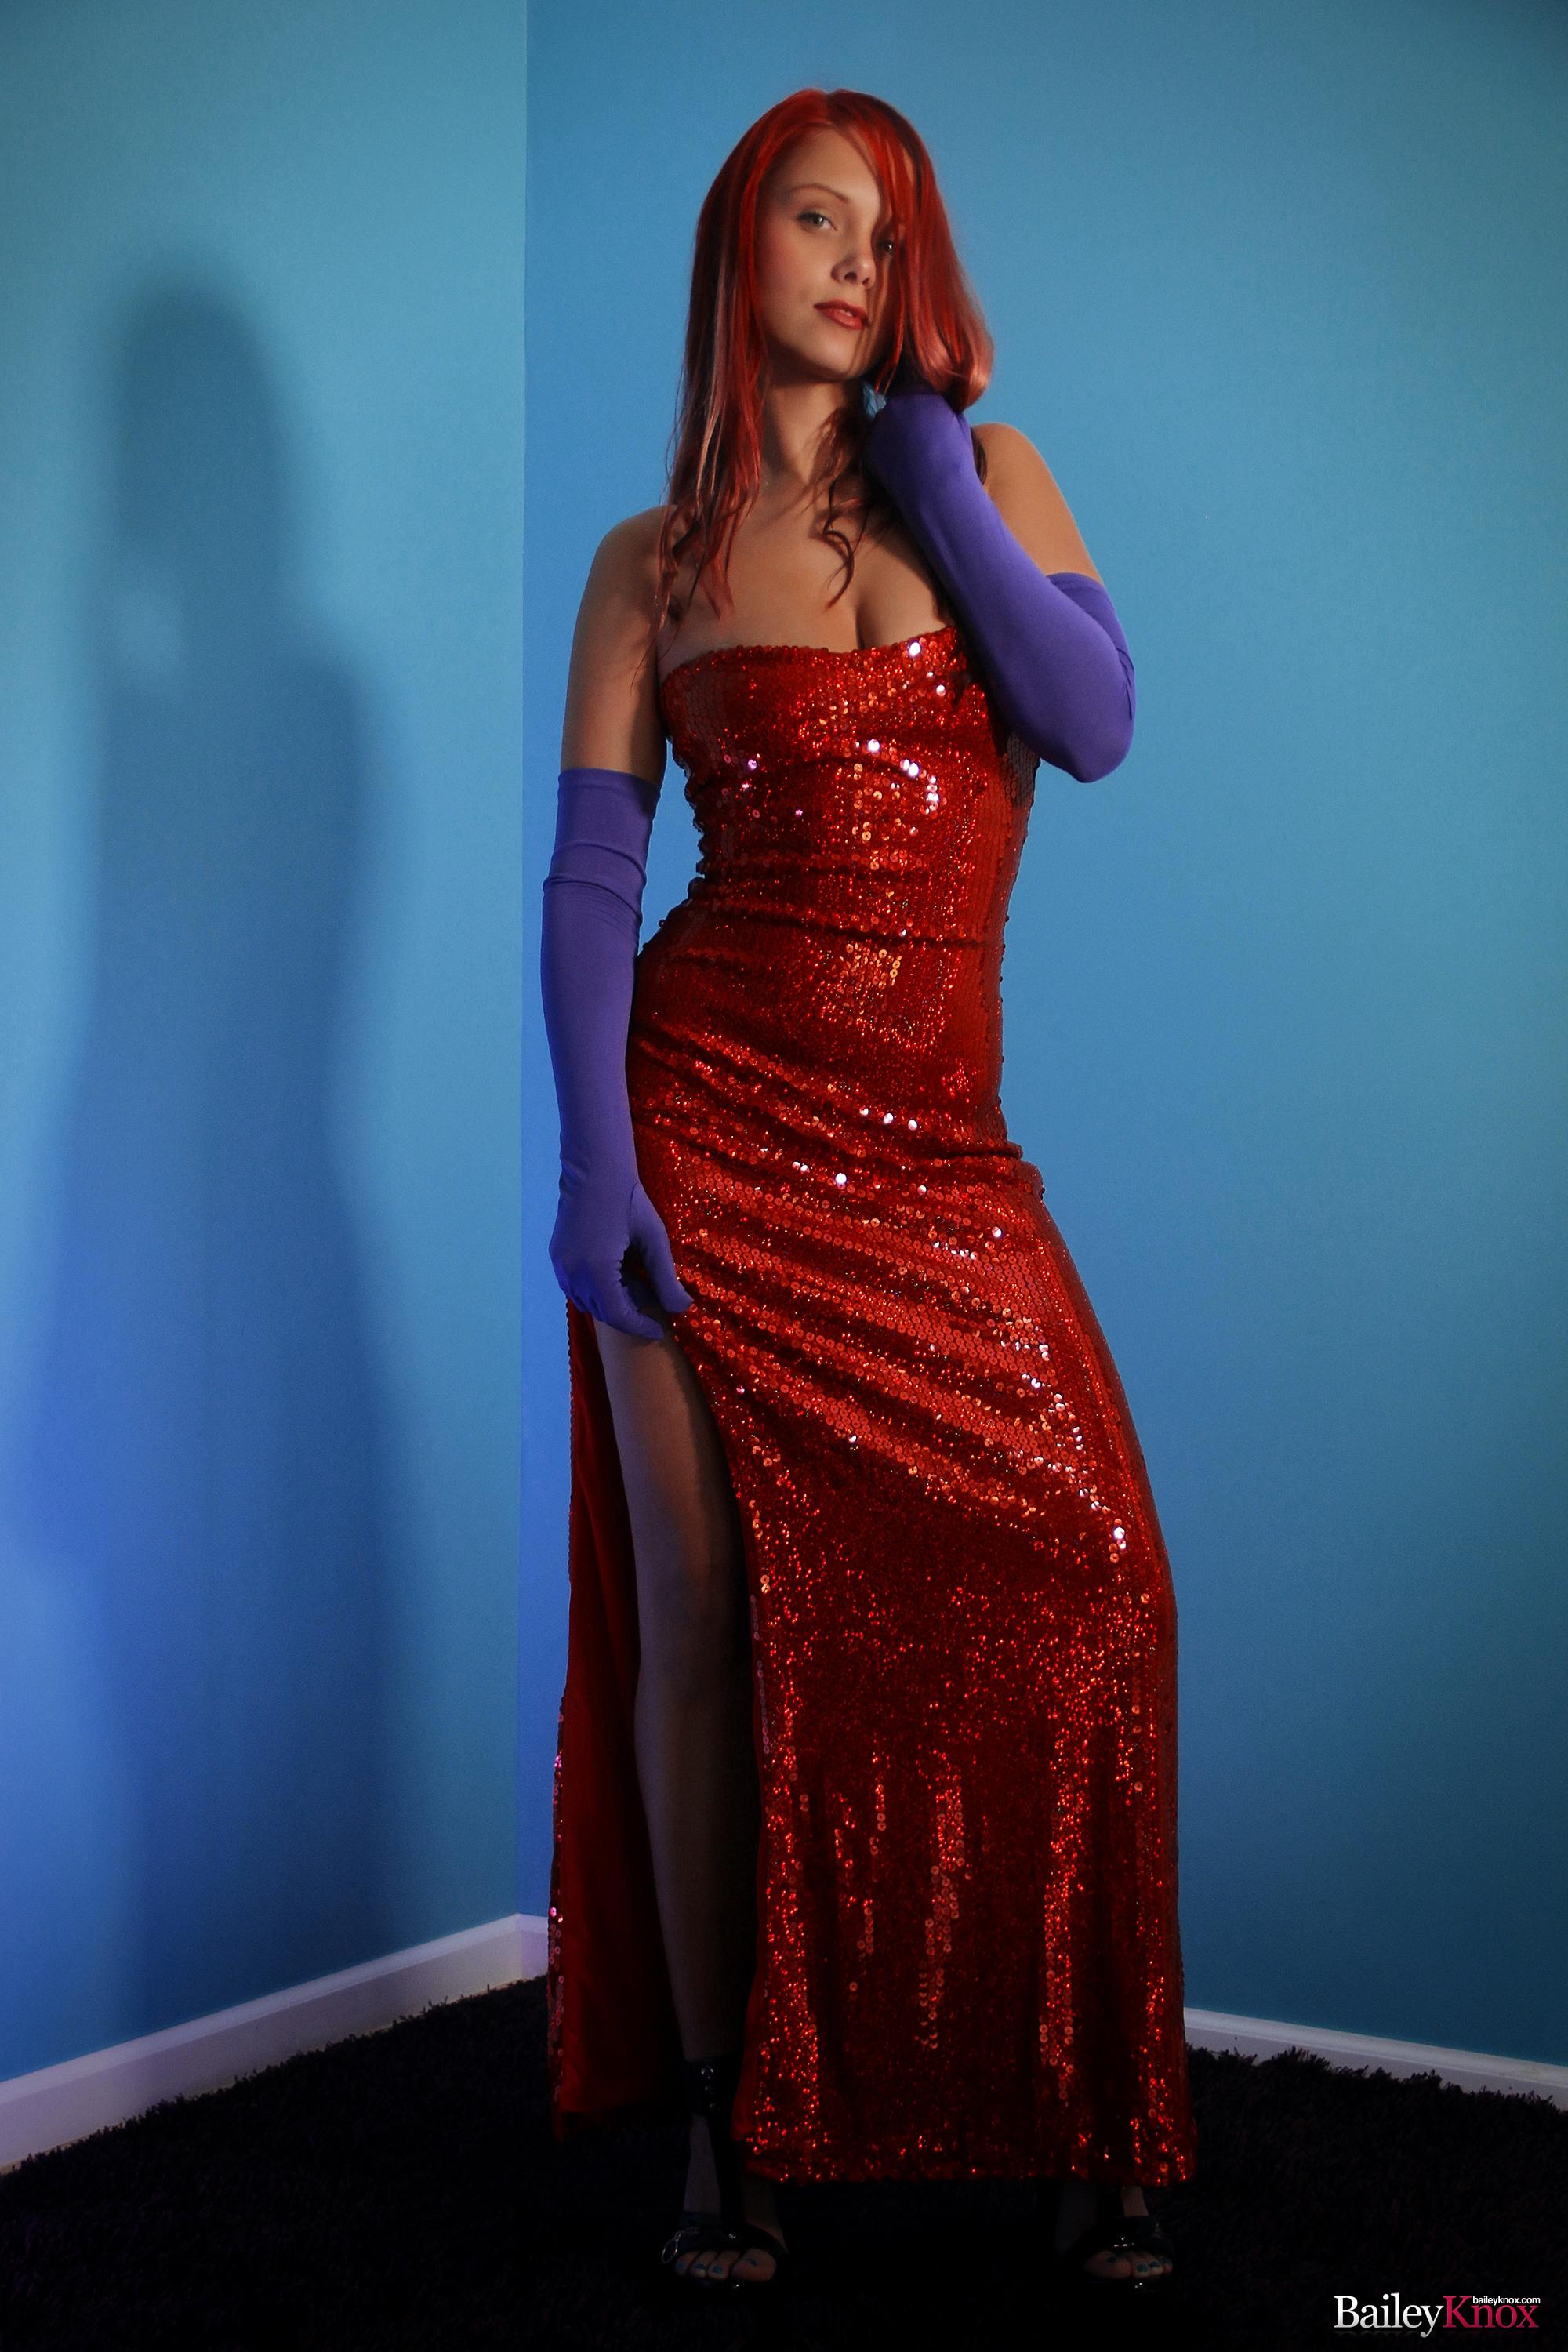 Bailey Knox gives some sexy cosplay as Jessica Rabbit #53397550